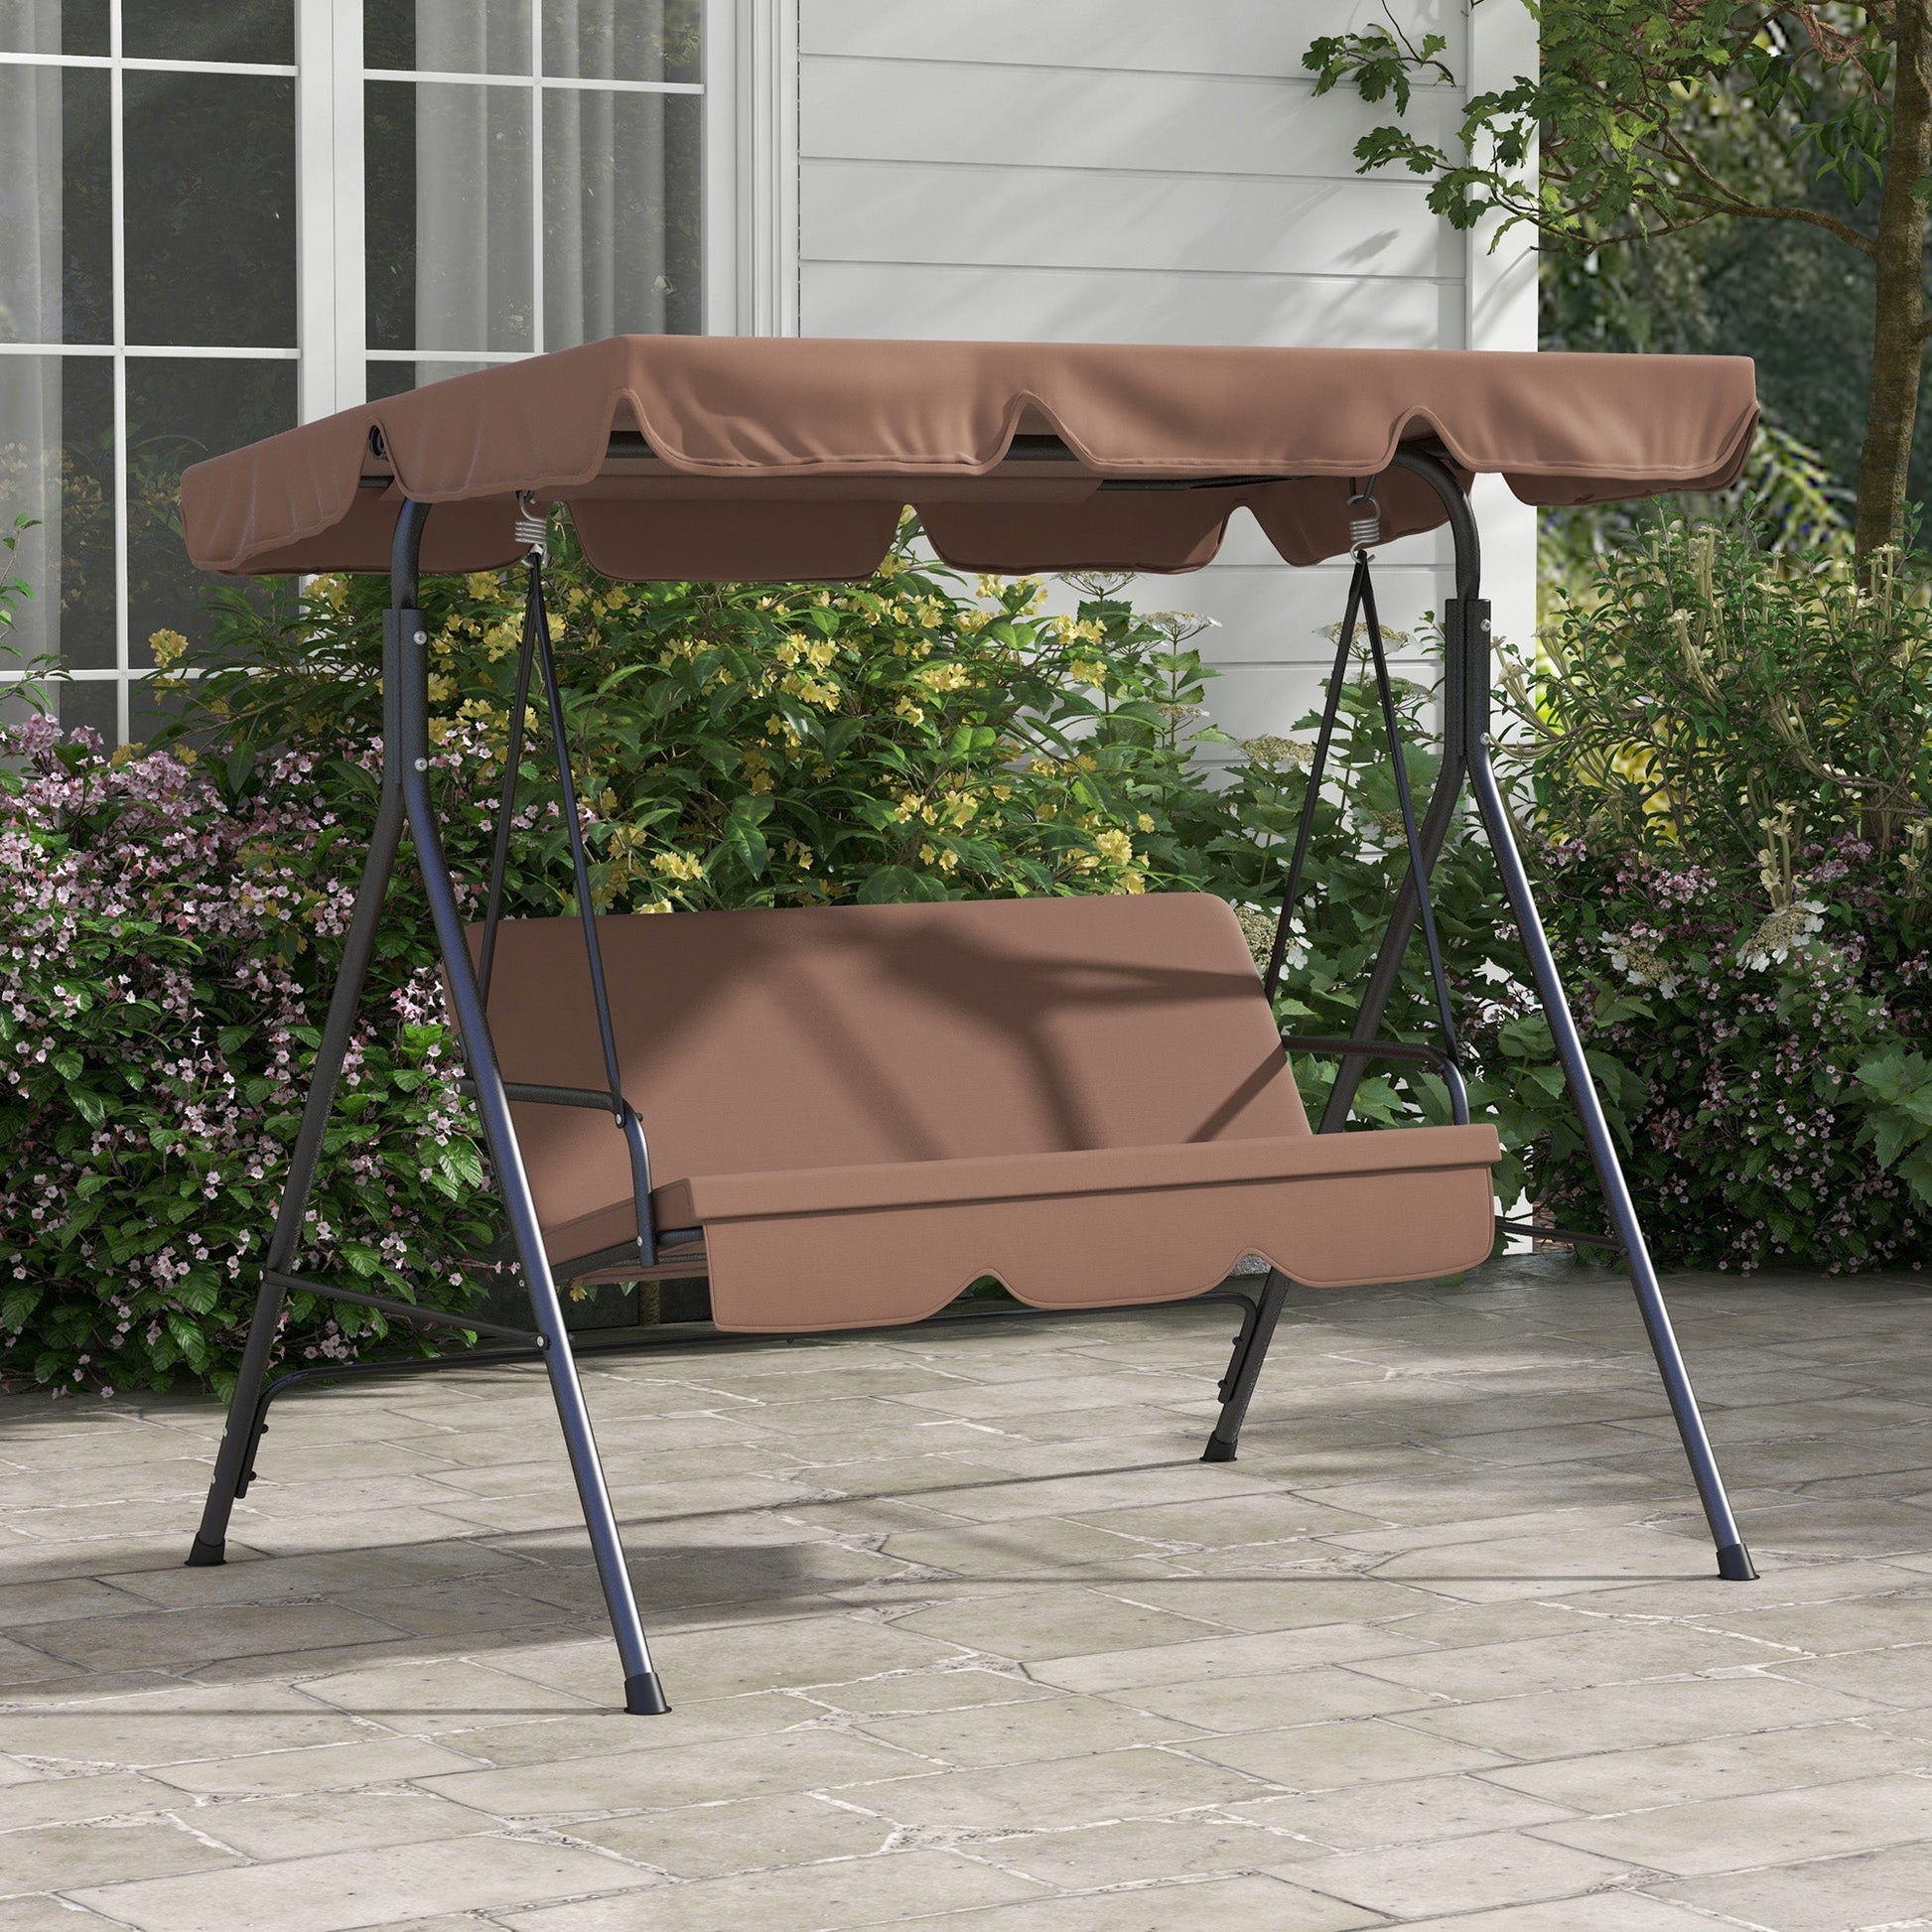 3-Seater Outdoor Porch Swing with Adjustable Canopy, Patio Swing Chair for Garden, Poolside, Backyard, Brown at Gallery Canada